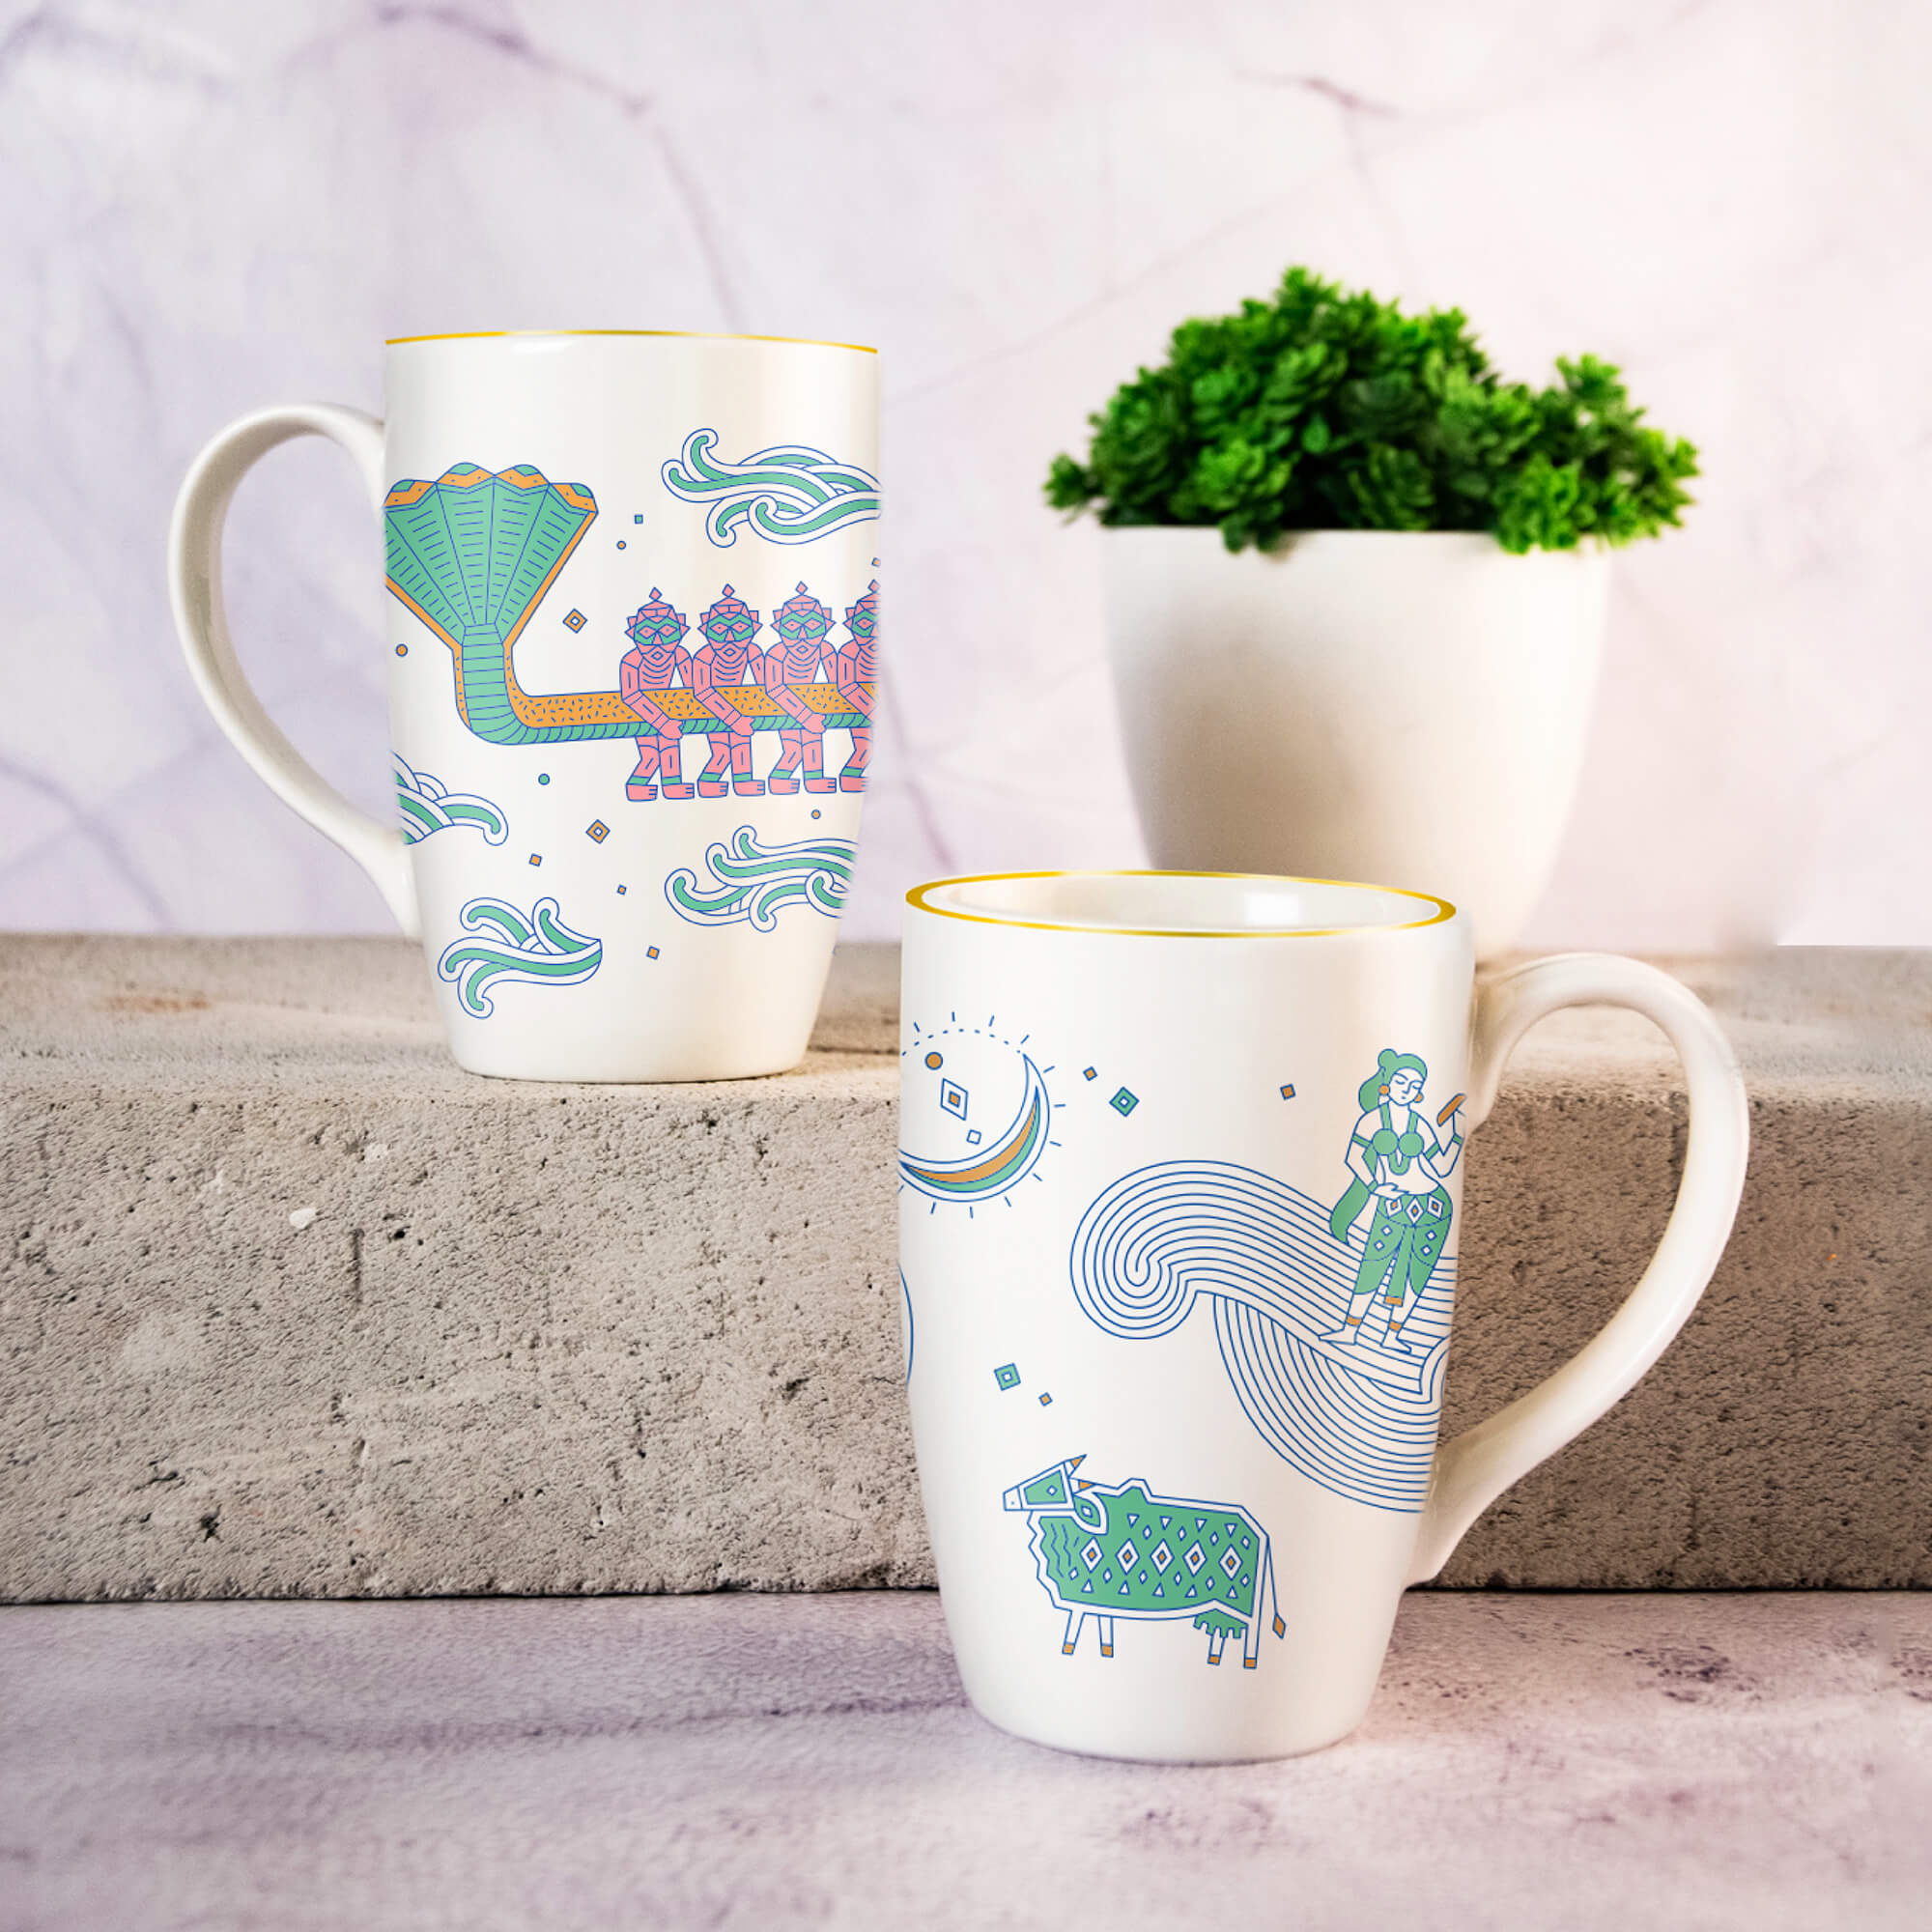 Online　Porcelain　Price　the　Buy　at　2,　Multicolour,　Manthan　Set　Best　Mugs　India　of　Churn　in　Ocean　Loopify